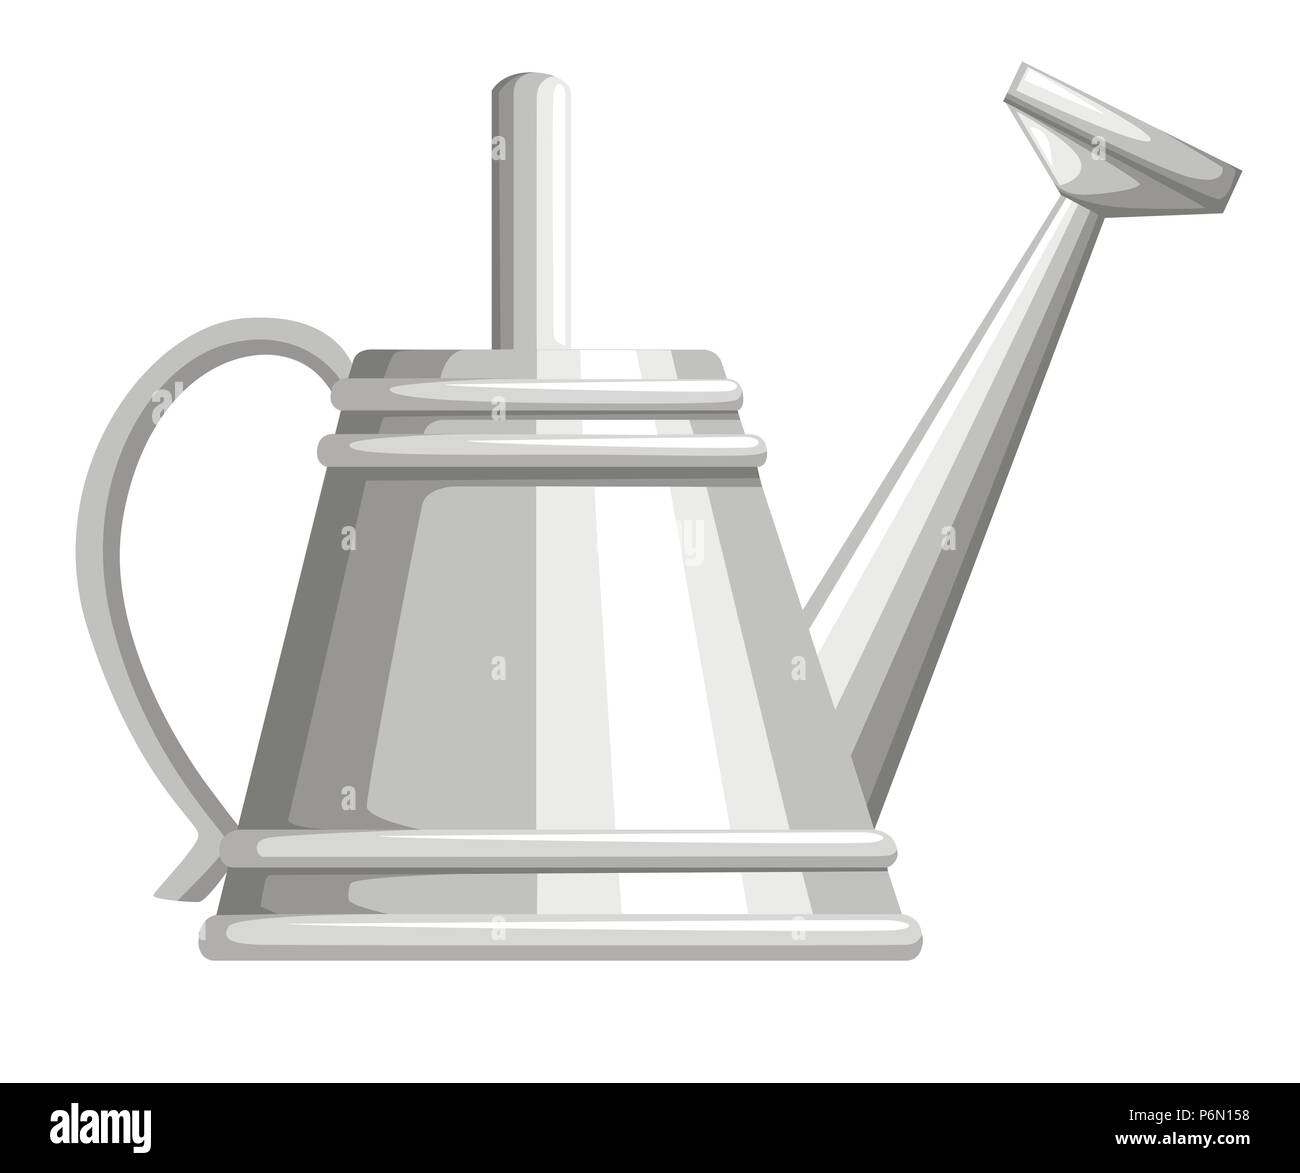 Gardening tool watering can. Metal flower can. Farming equipment flat style. Vector illustration isolated on white background. Stock Vector